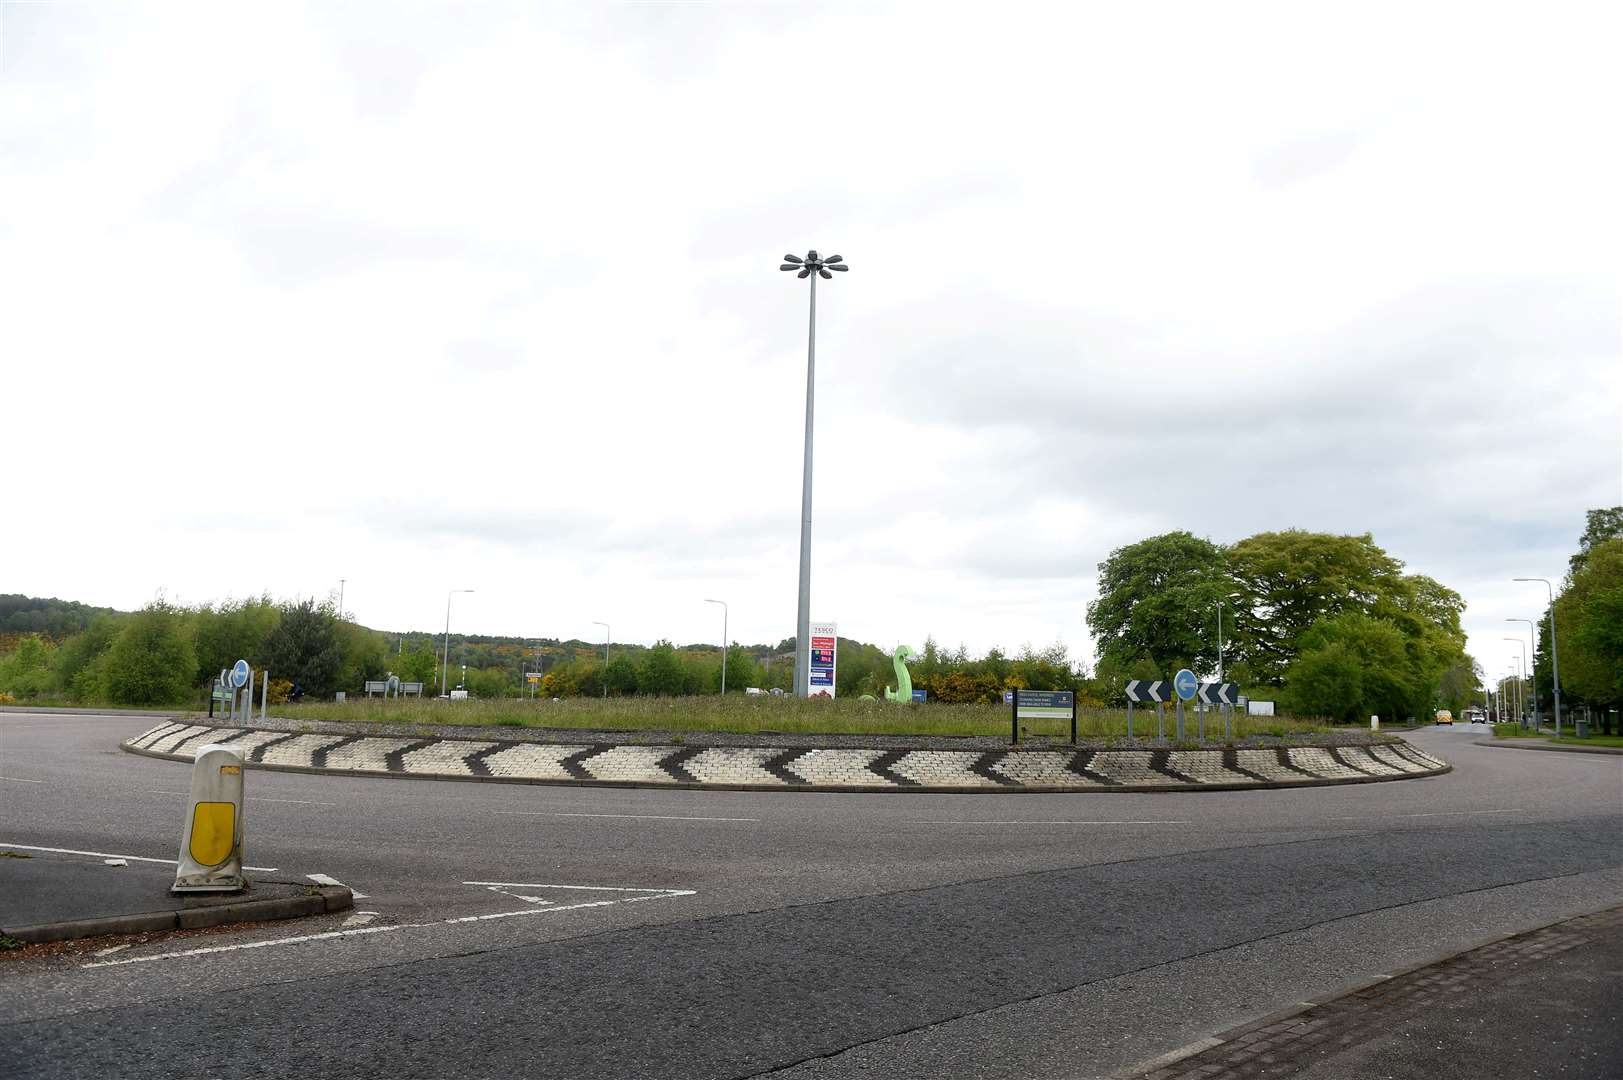 Holm Roundabout which has advert sign.